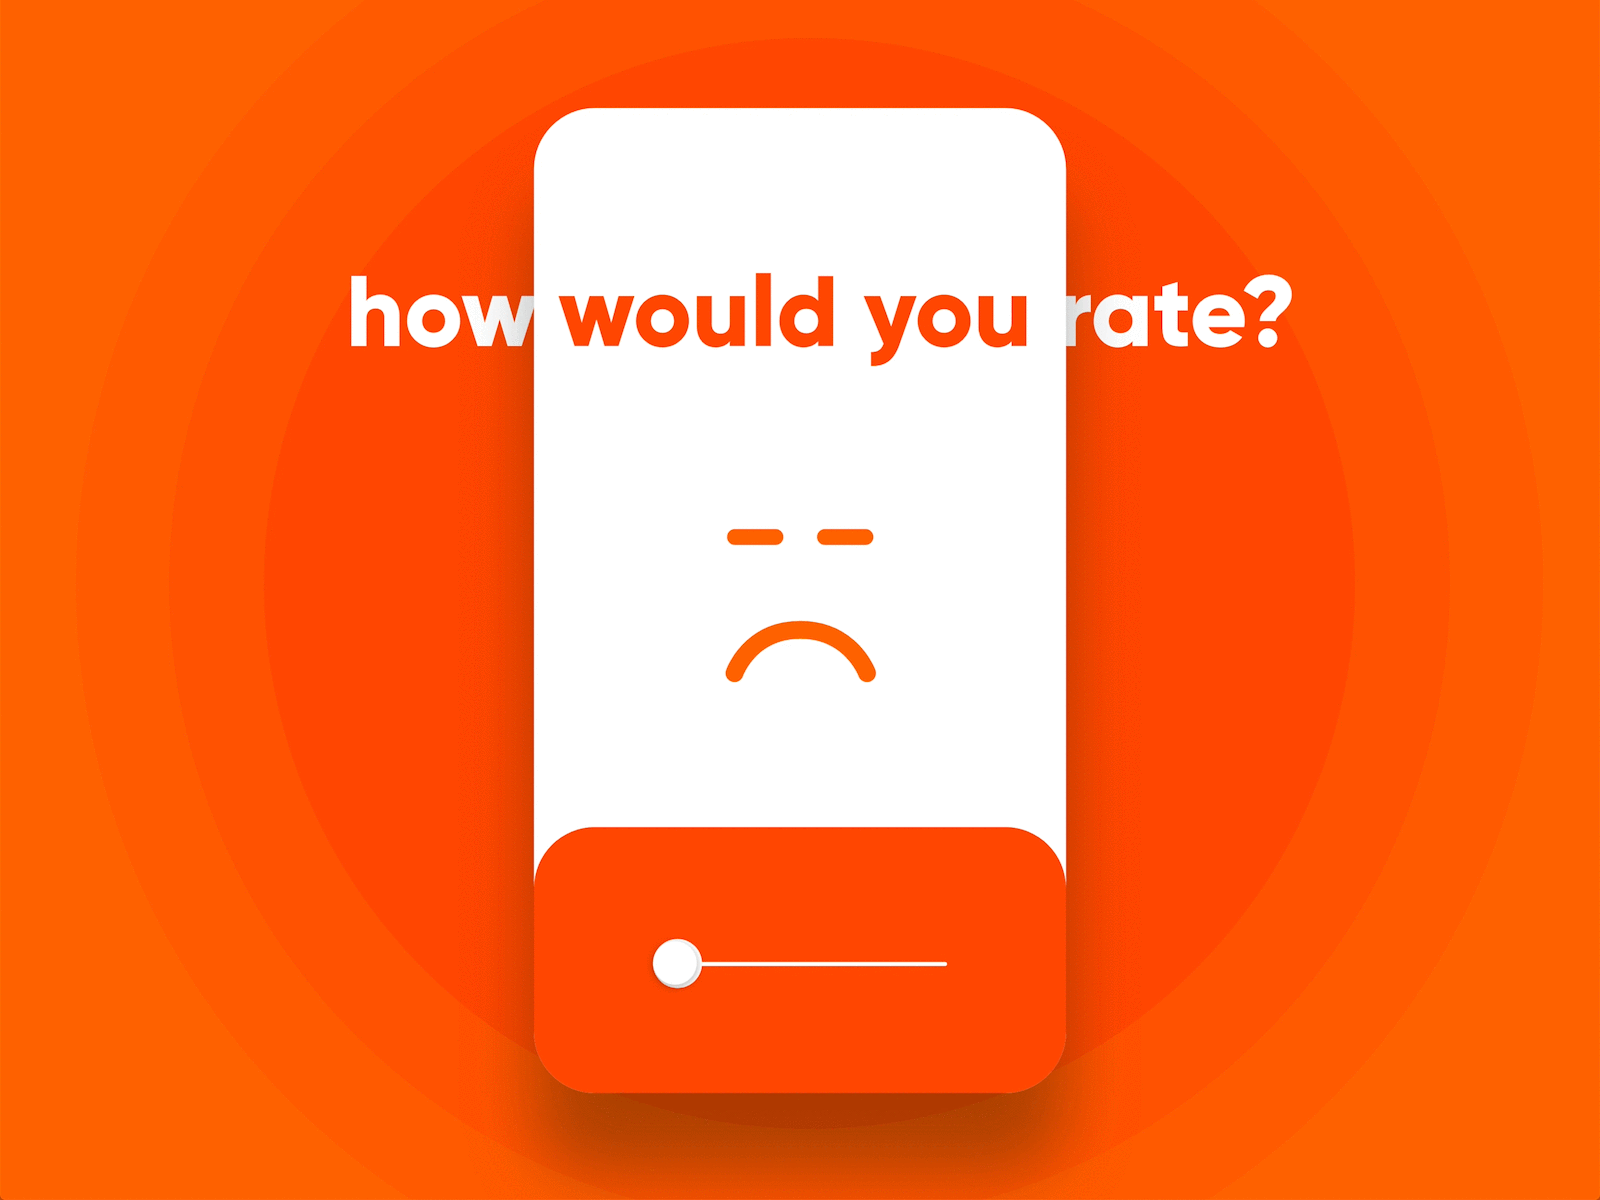 Rate yourself... animation app emotional experience feedback graphics illustraion micro interaction microinteraction mobile mobile app mobile ui slider slider design ui user experience ux xd xd design xddailychallenge